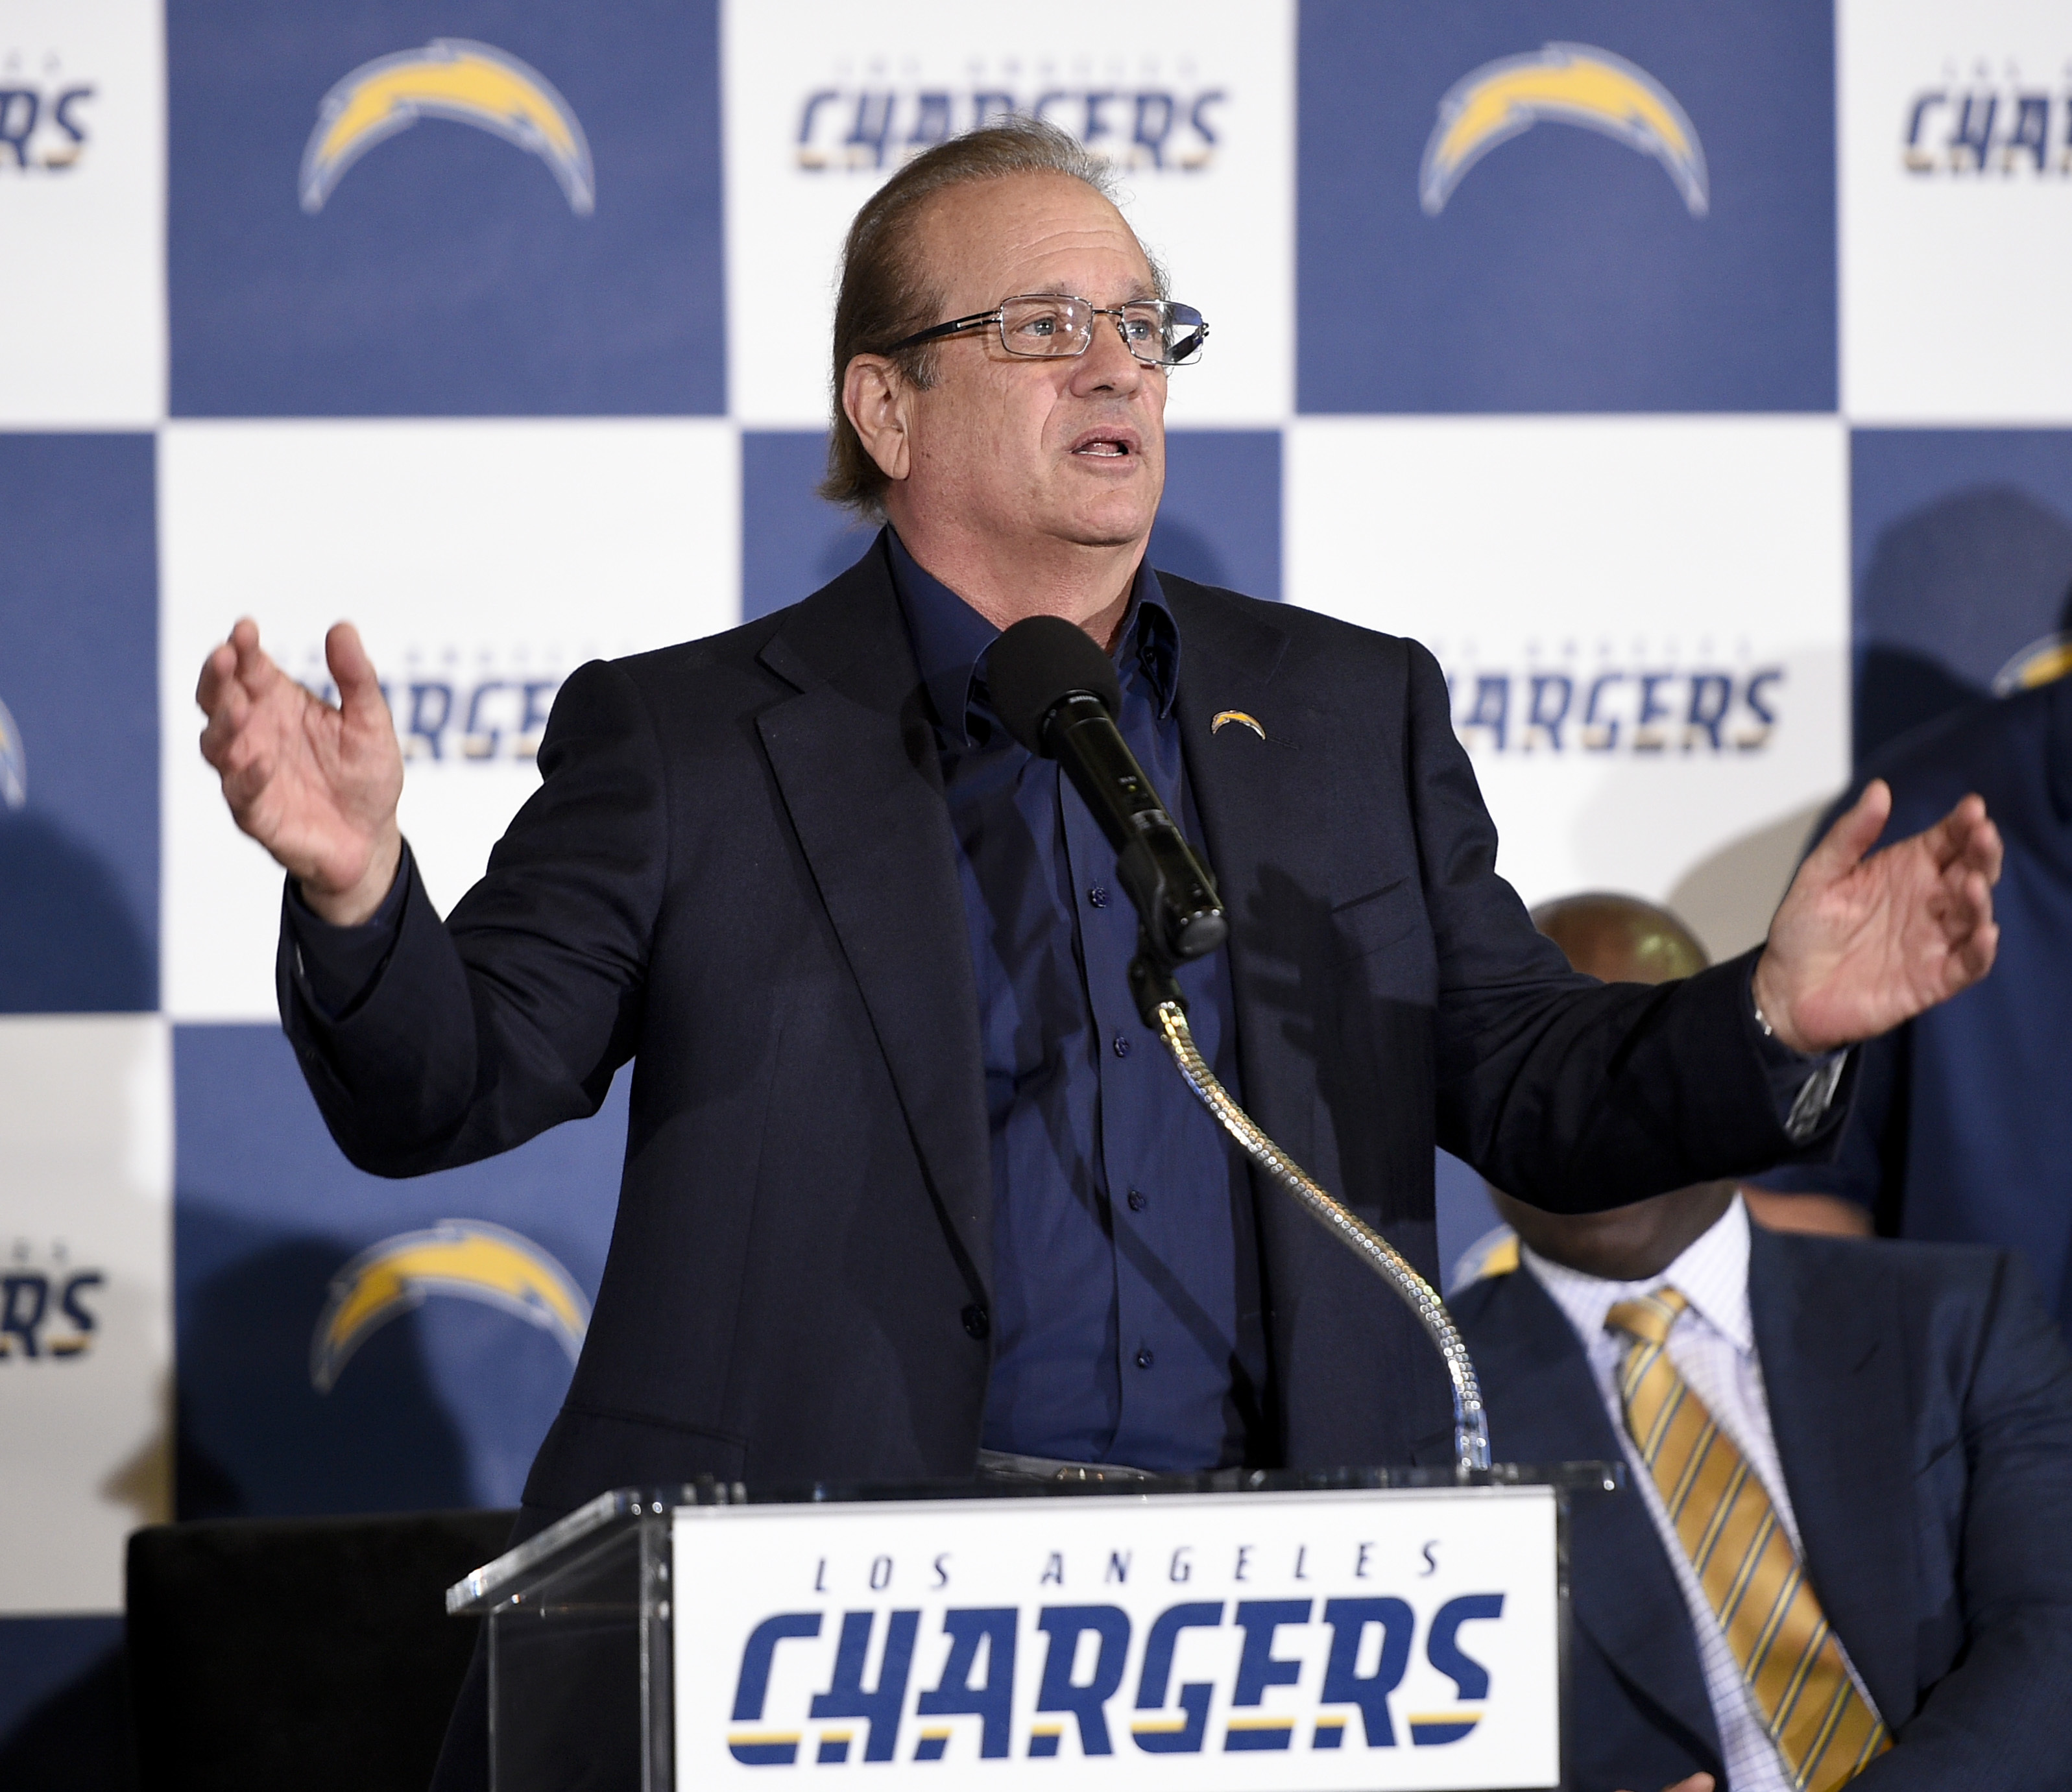 Los Angeles Chargers Owner Spanos Berberian Looking to Sell 24